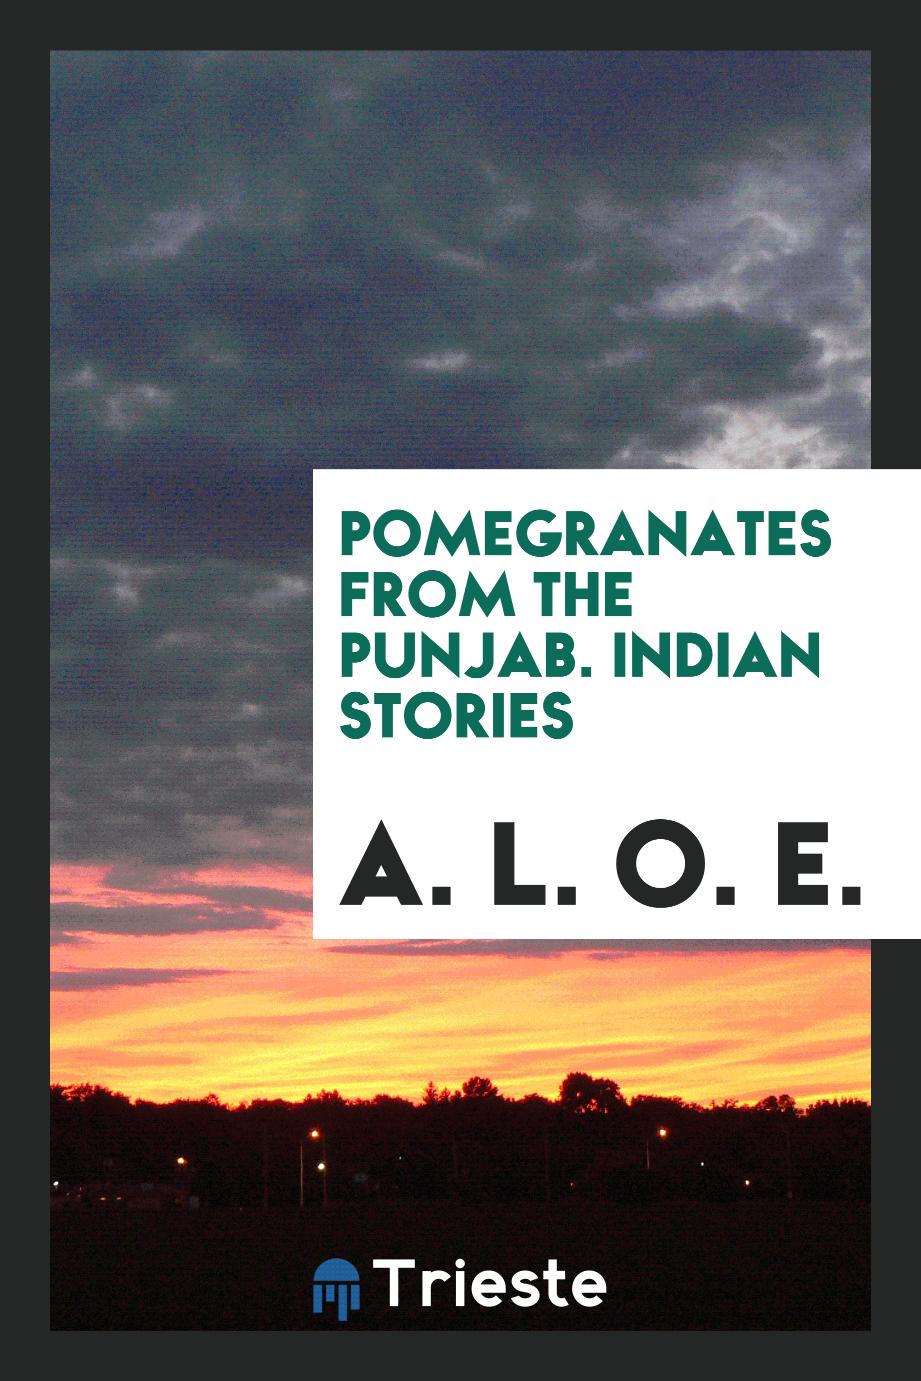 Pomegranates from the Punjab. Indian stories